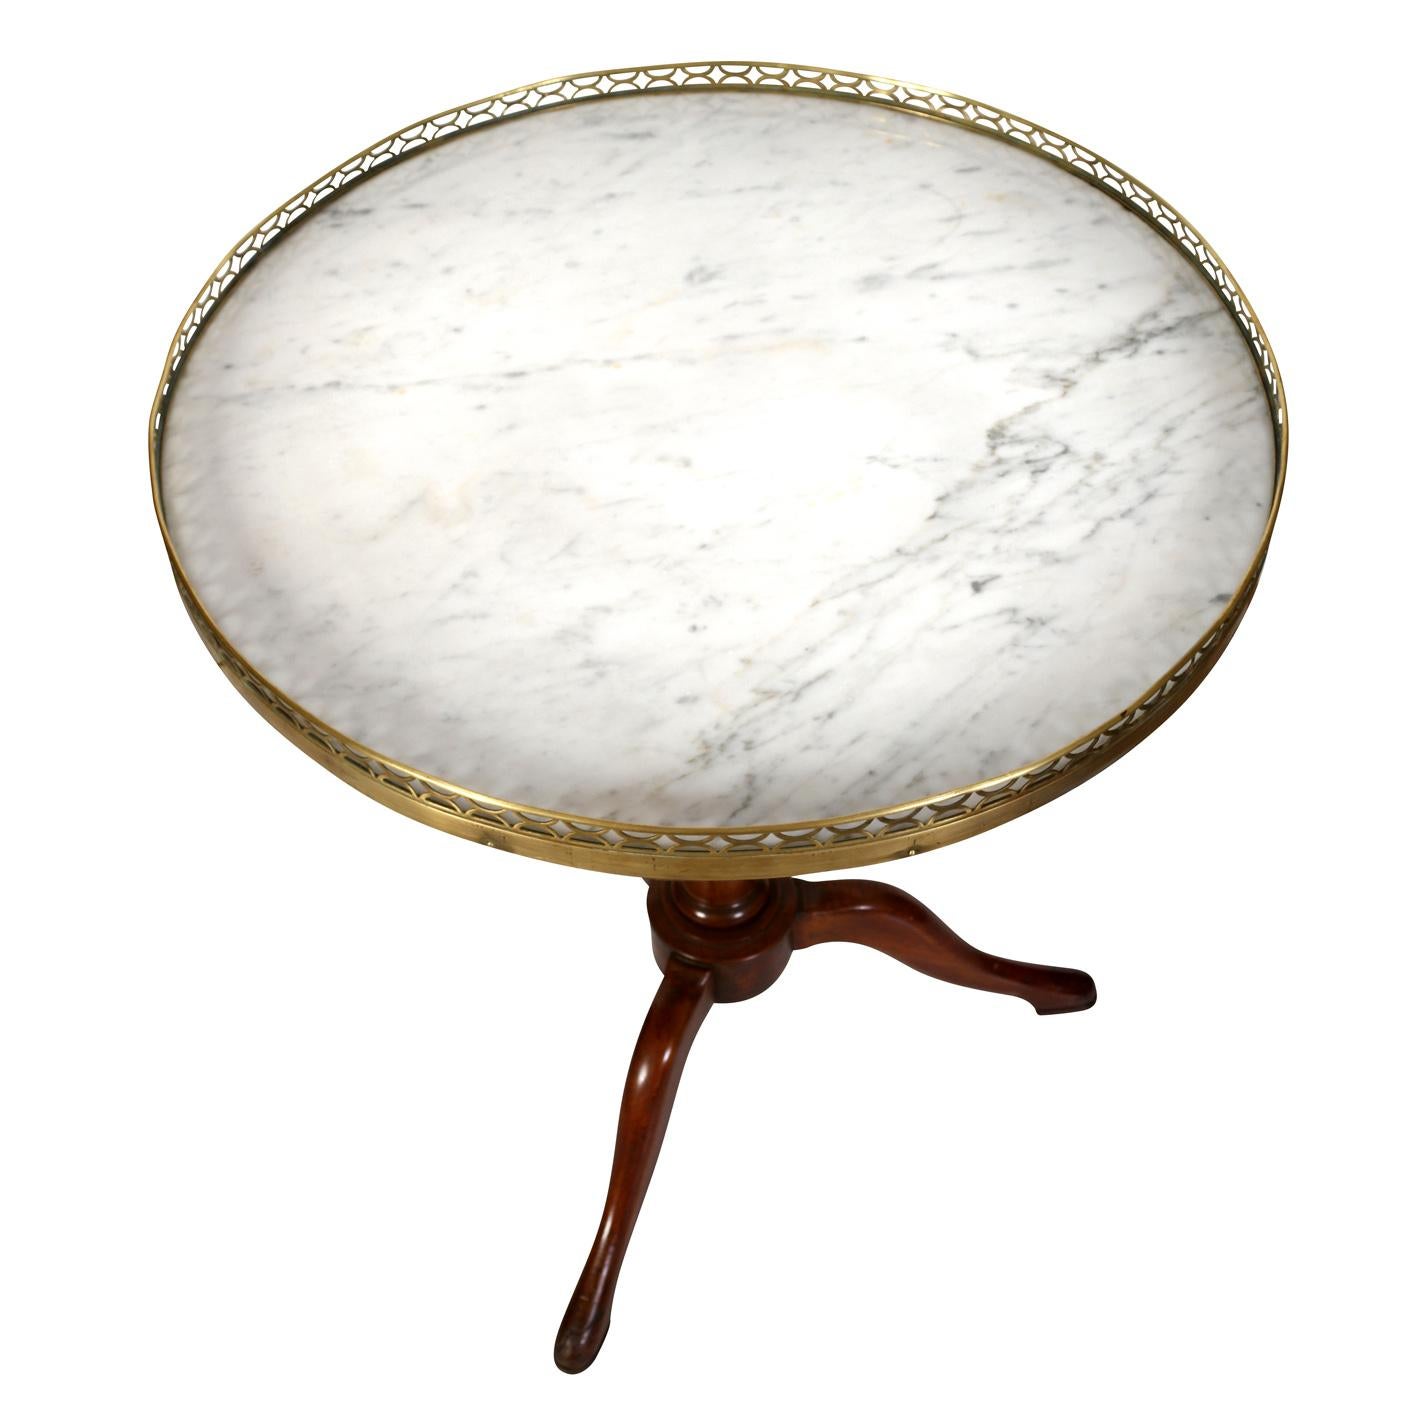 A pair of round marble top side tables with pierced brass gallery rail and a fluted wood pedestal base with curved tripod legs.